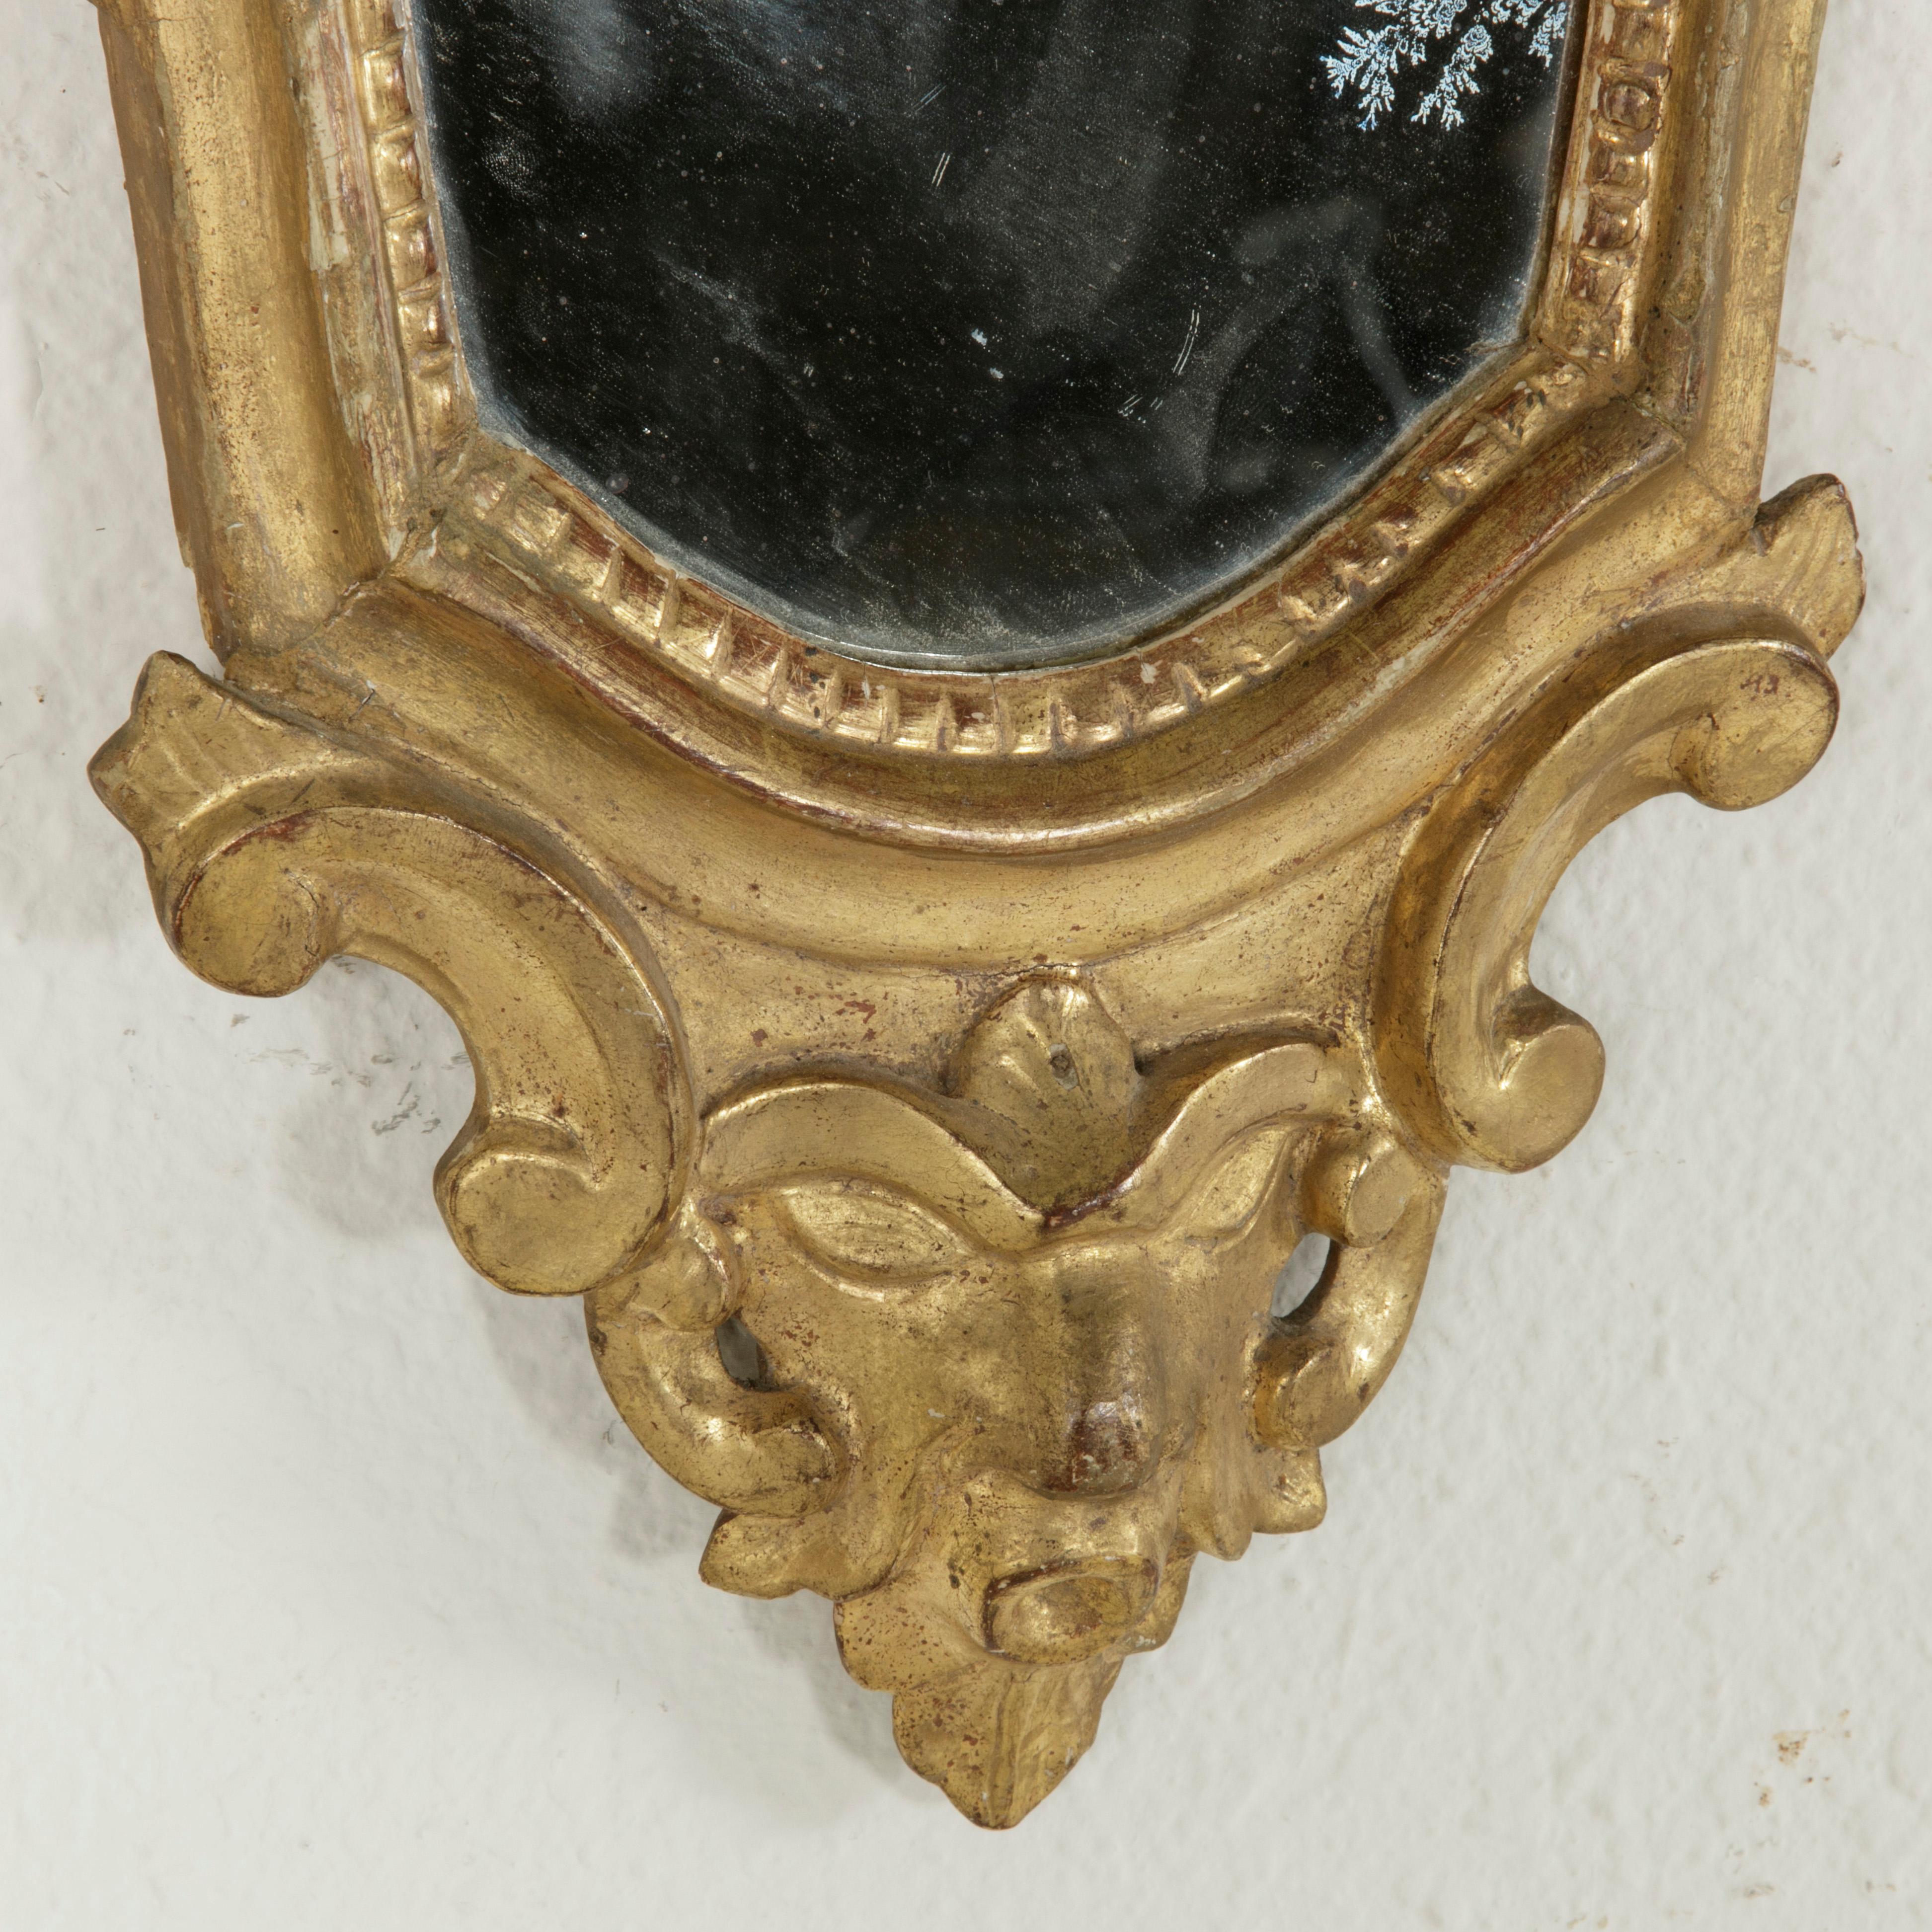 Early 18th Century French Regency Period Giltwood Mirror with Mercury Glass 5